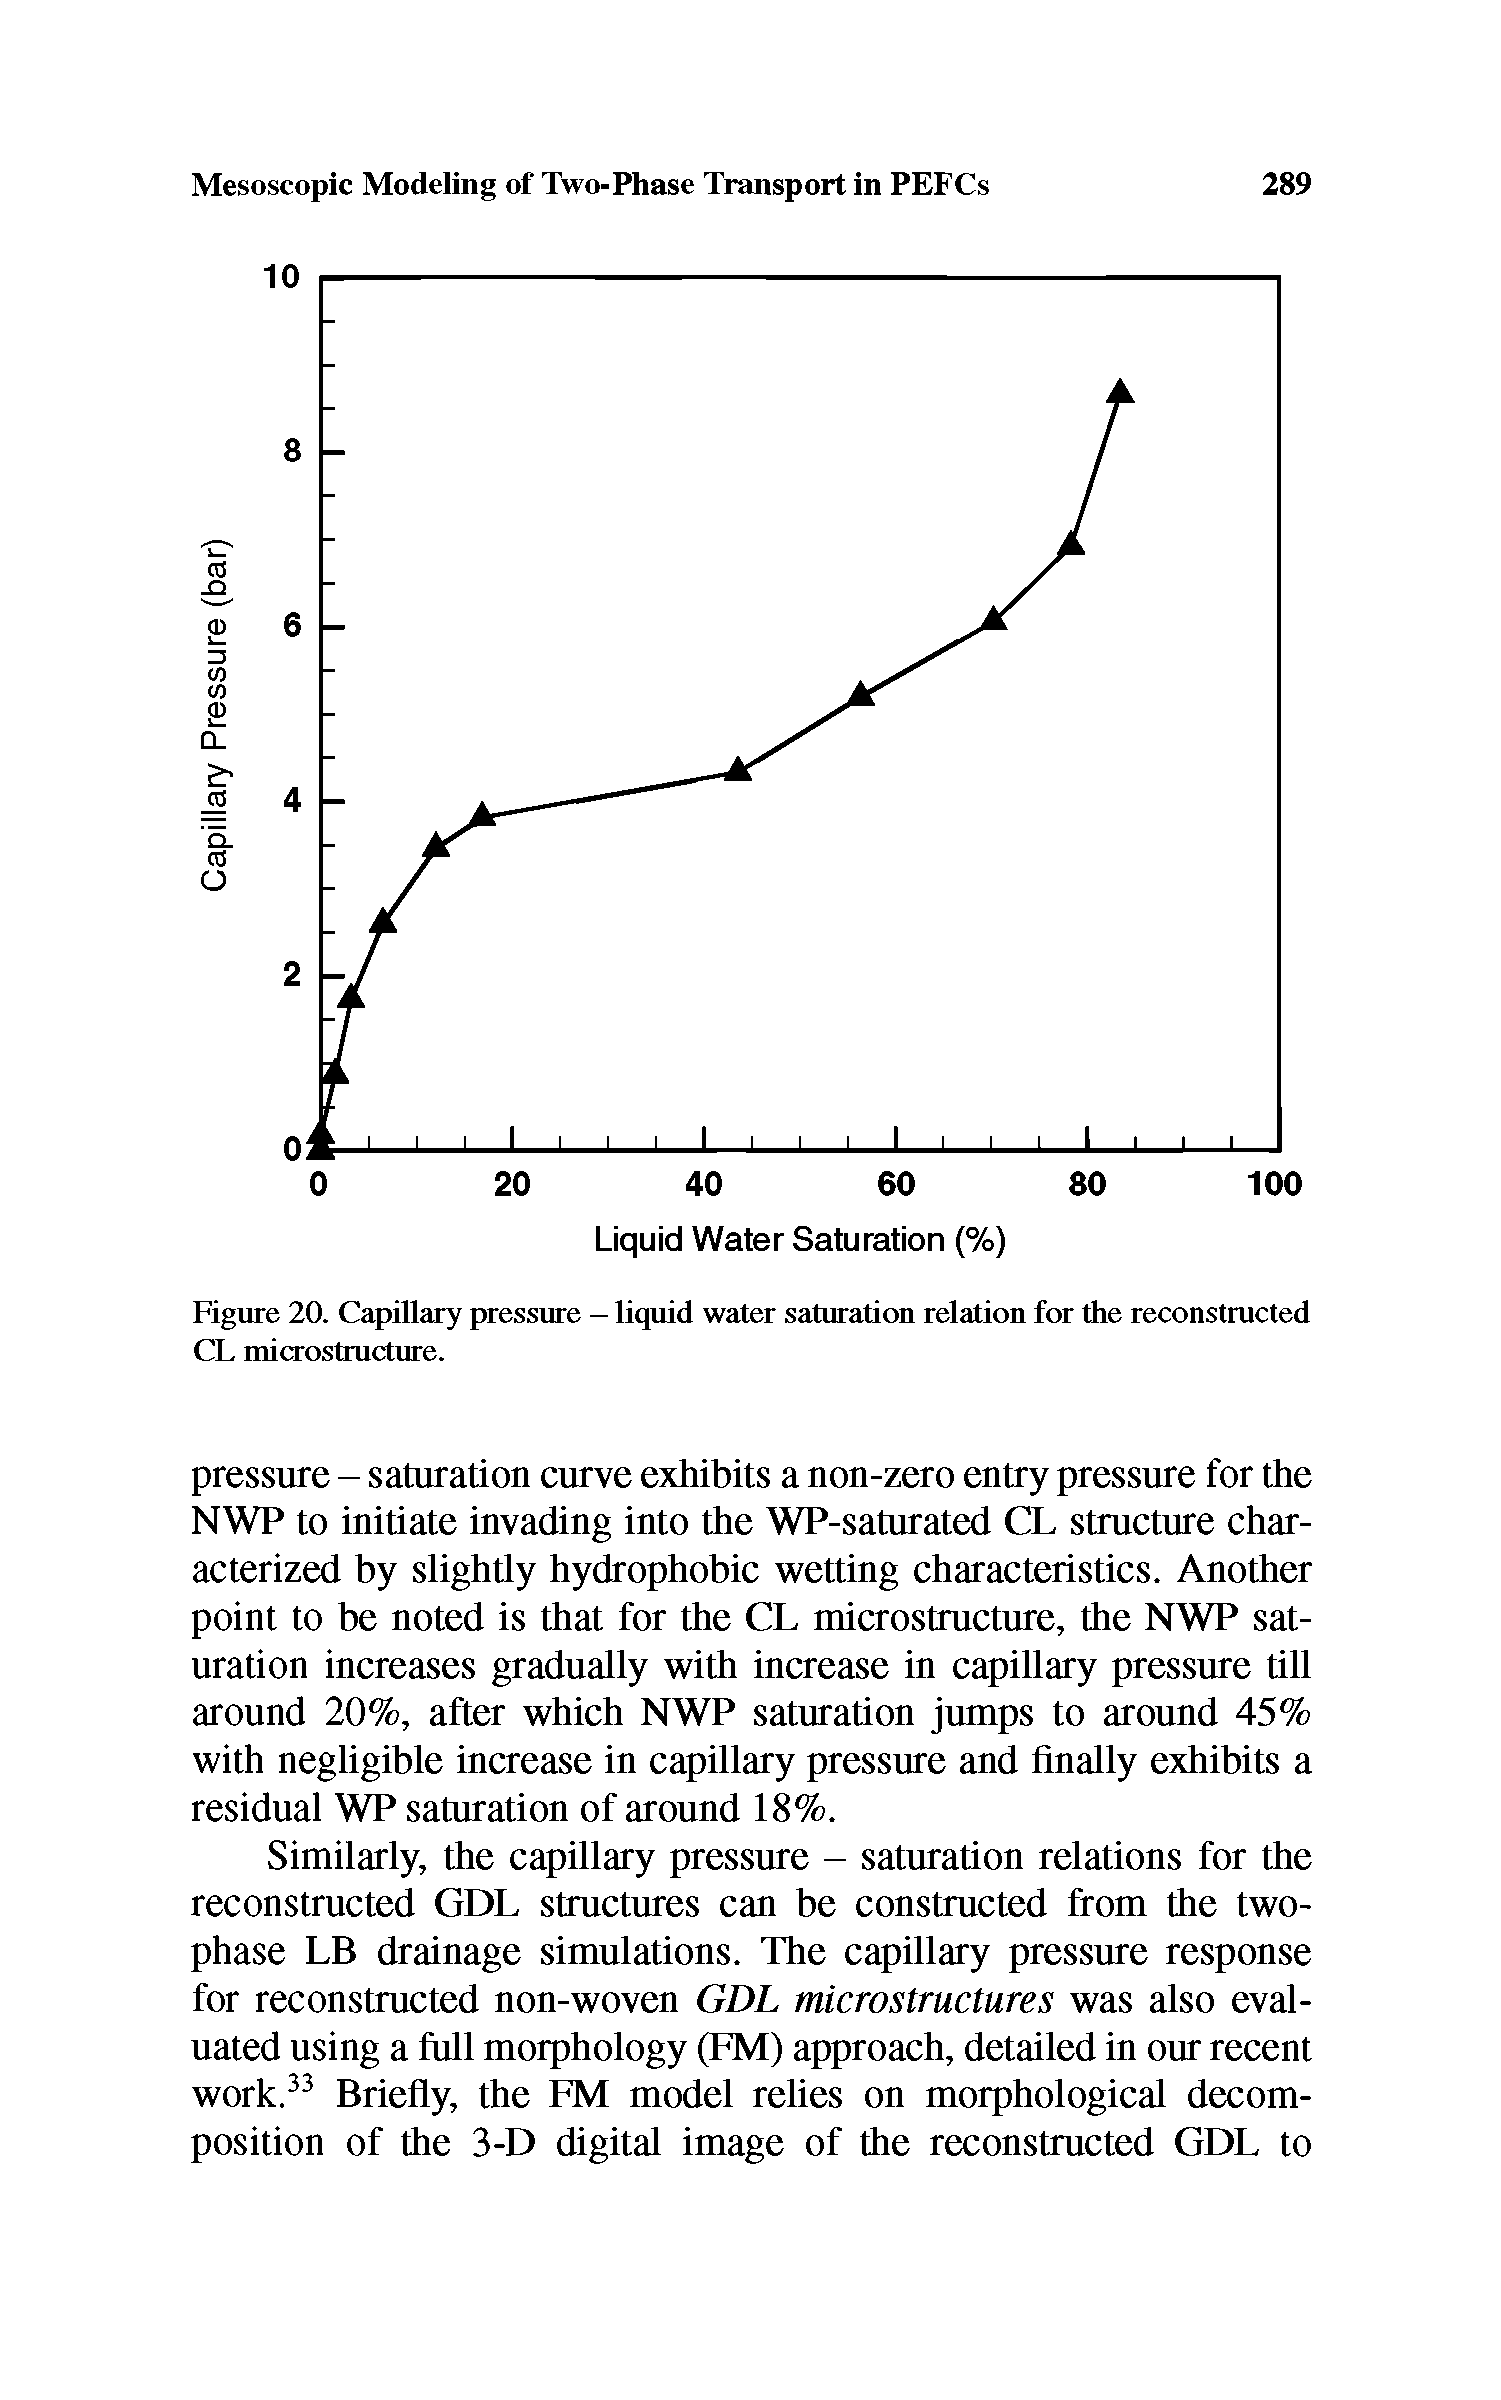 Figure 20. Capillary pressure — liquid water saturation relation for die reconstructed CL microstructure.